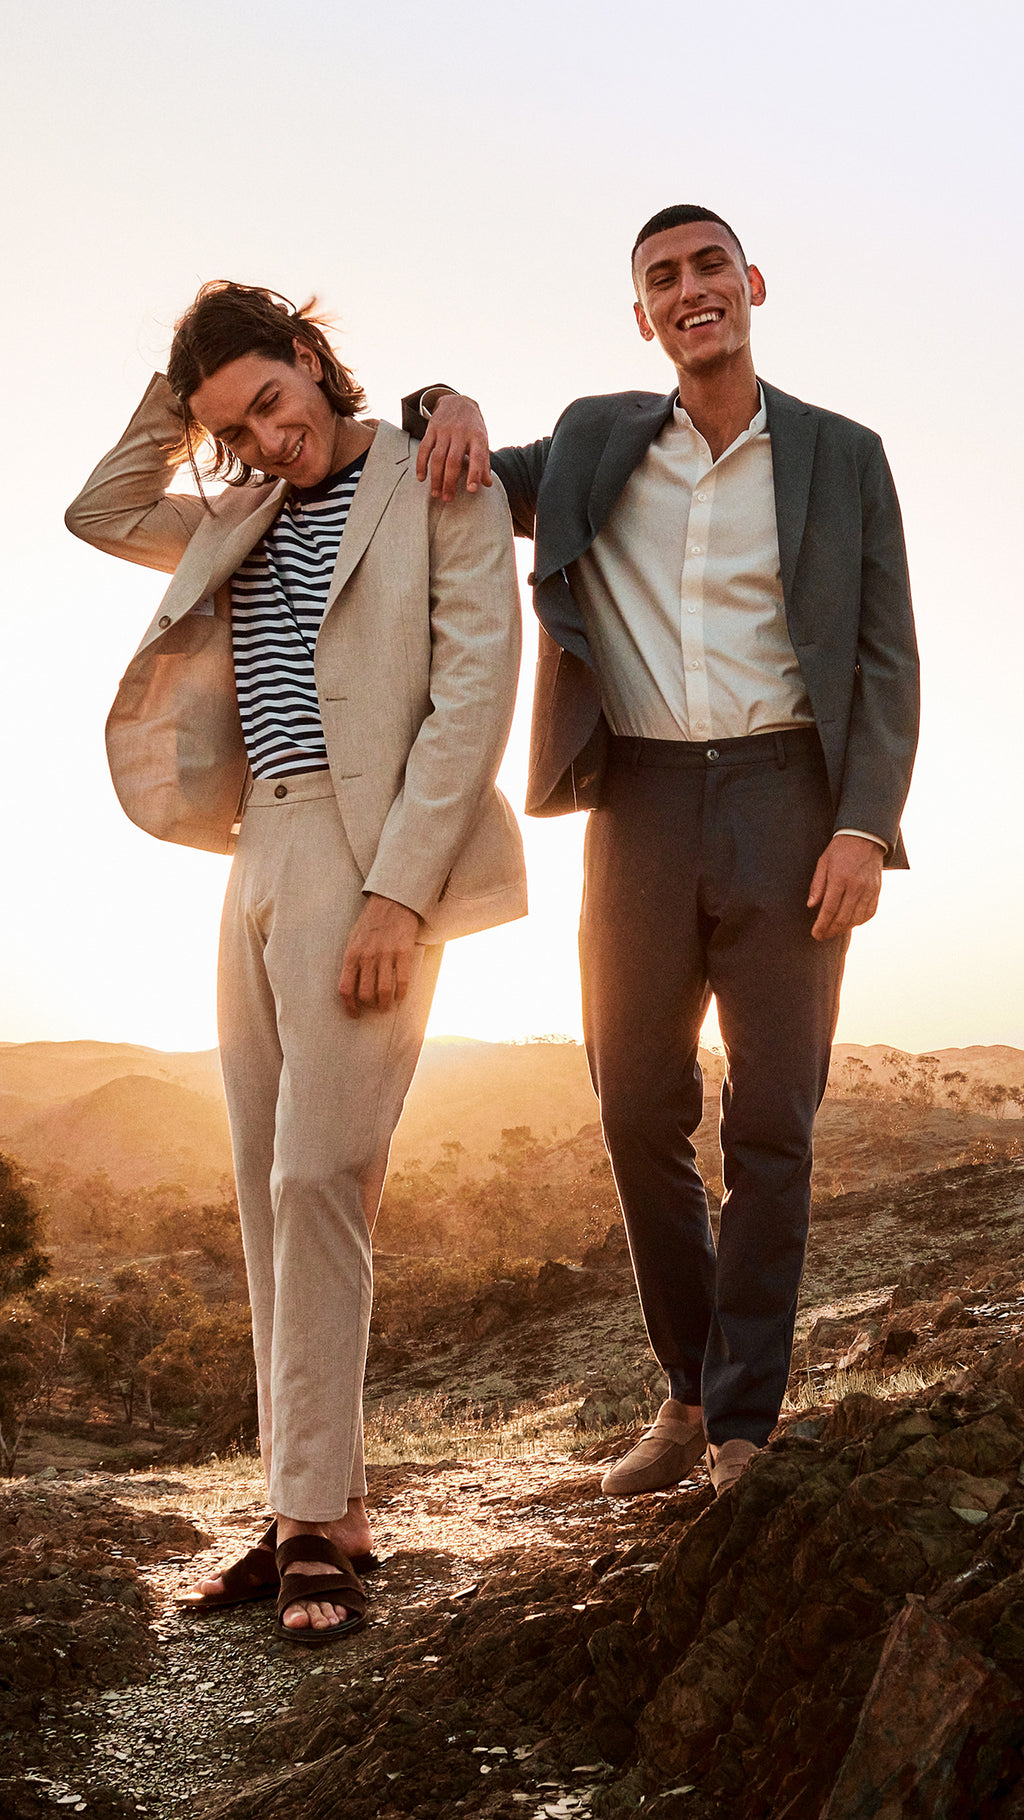 Two male models standing in a desert wearing a beige suit and grey suit looking happy